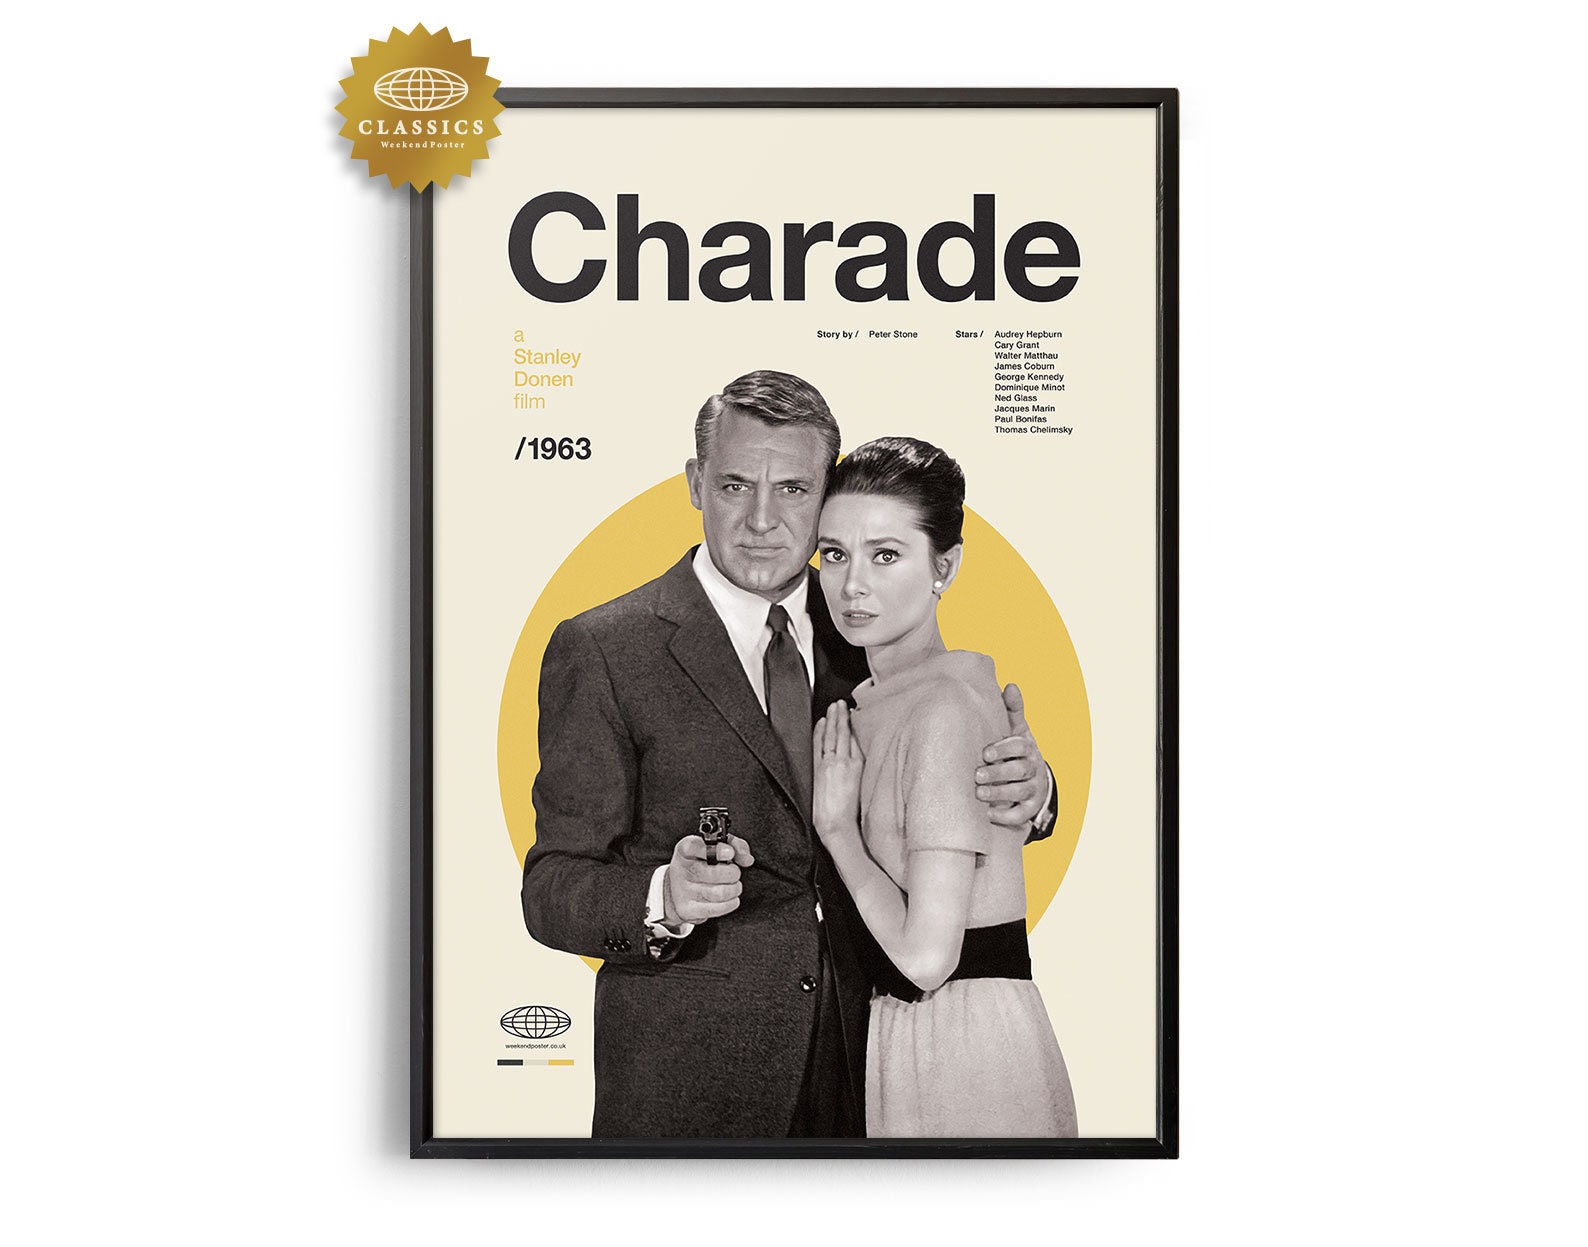 The Ace Black Movie Blog: Movie review: Charade (1963)